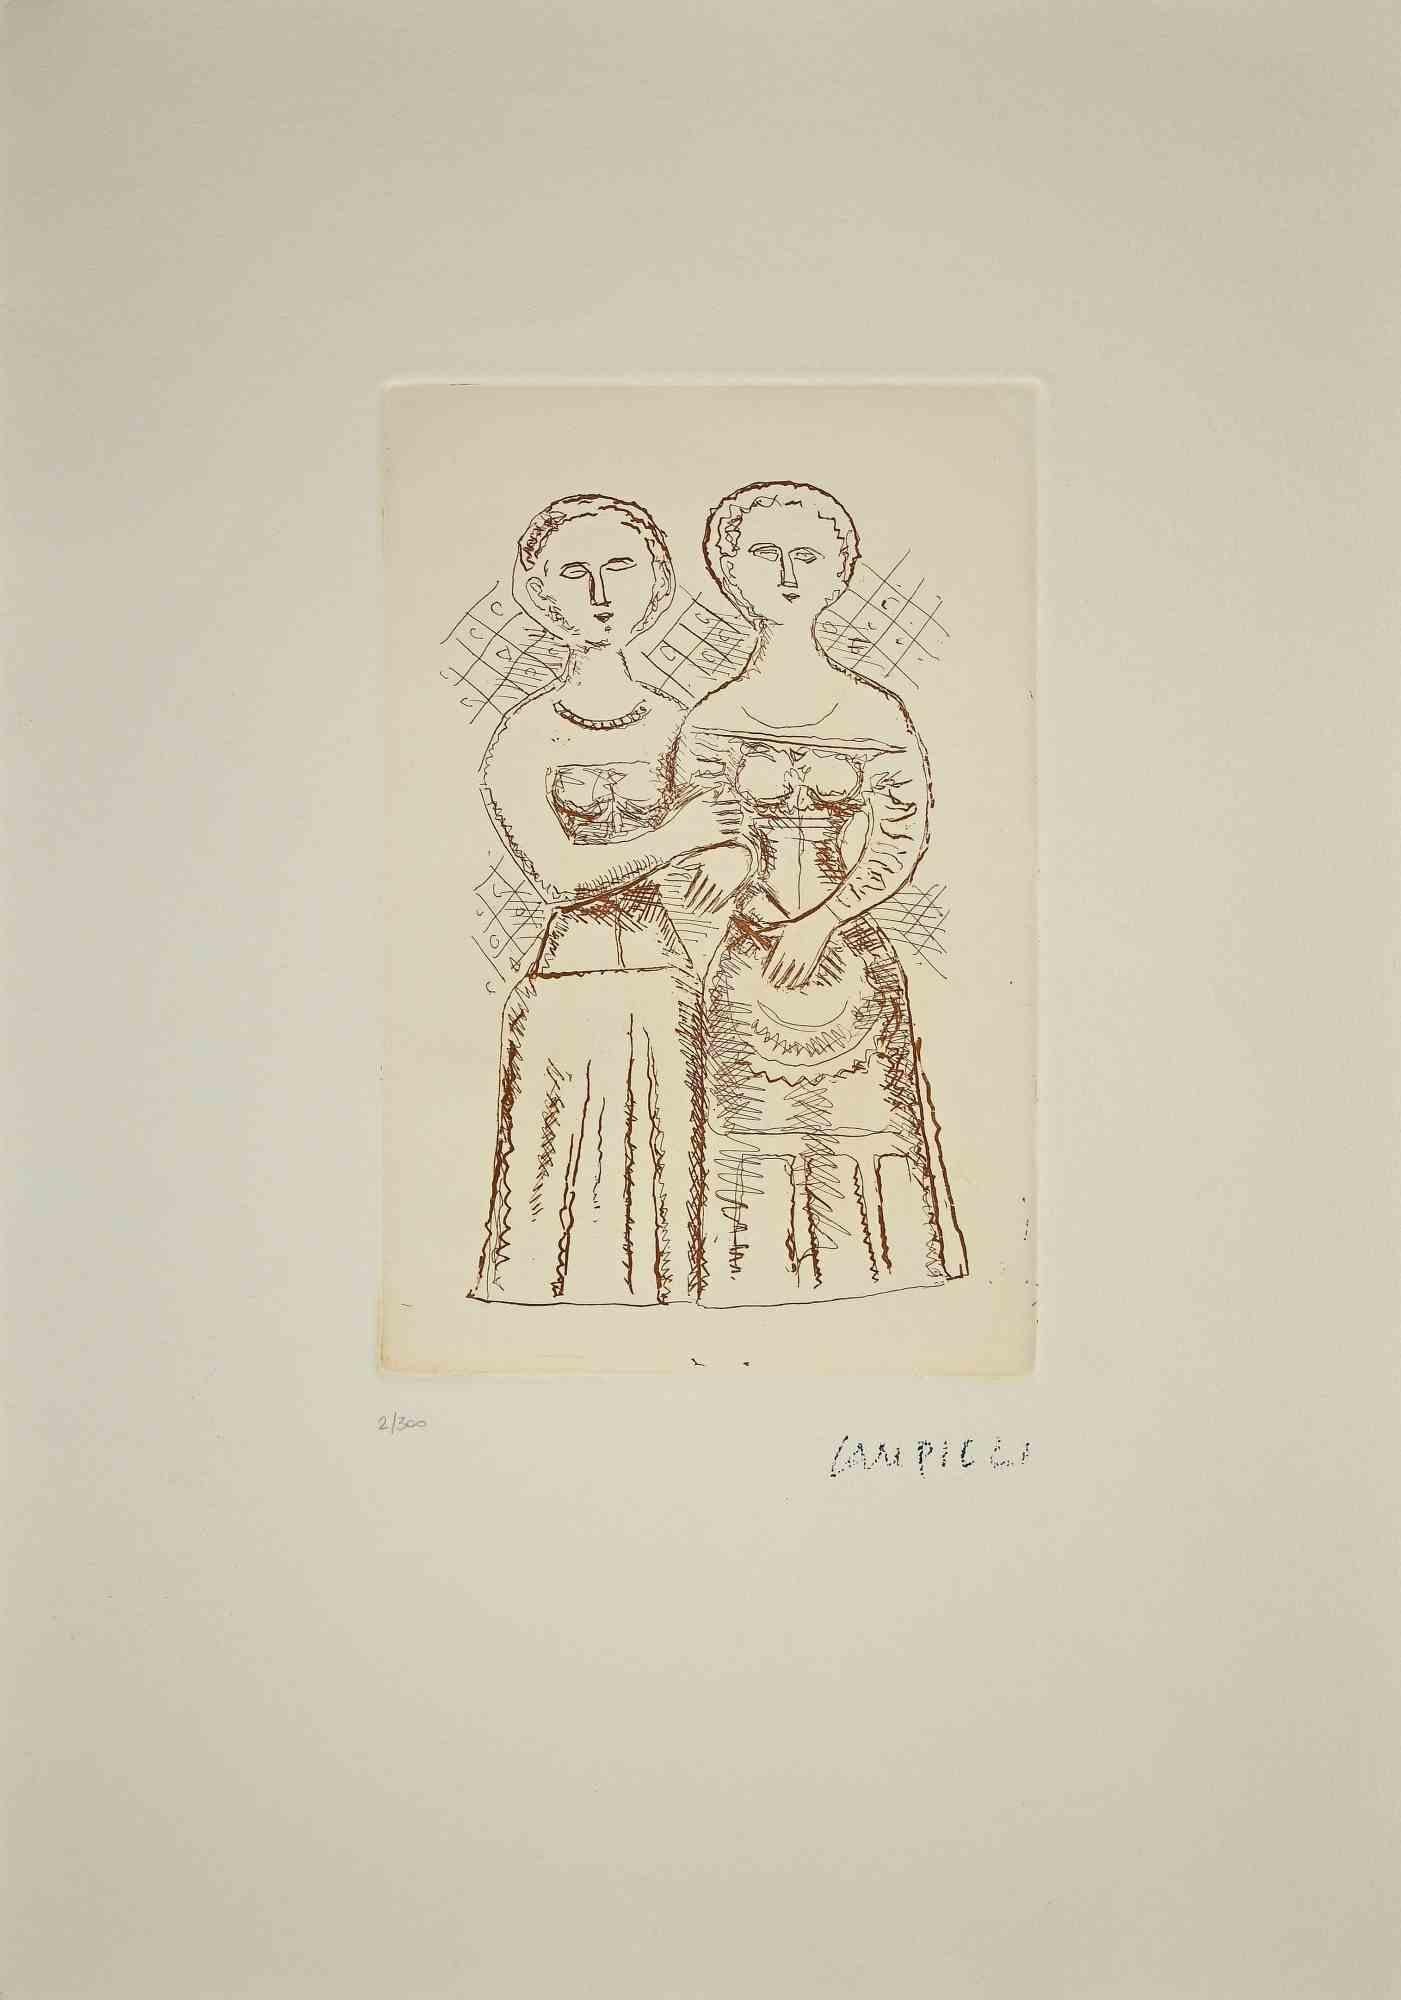 The two women is an original print realized by Massimo Campigli in the 1970/1971.

Beautiful etching and drypoint on paper.

This artwork it is part of a series of works created in the last period of the artist and printed at the turn of the year of